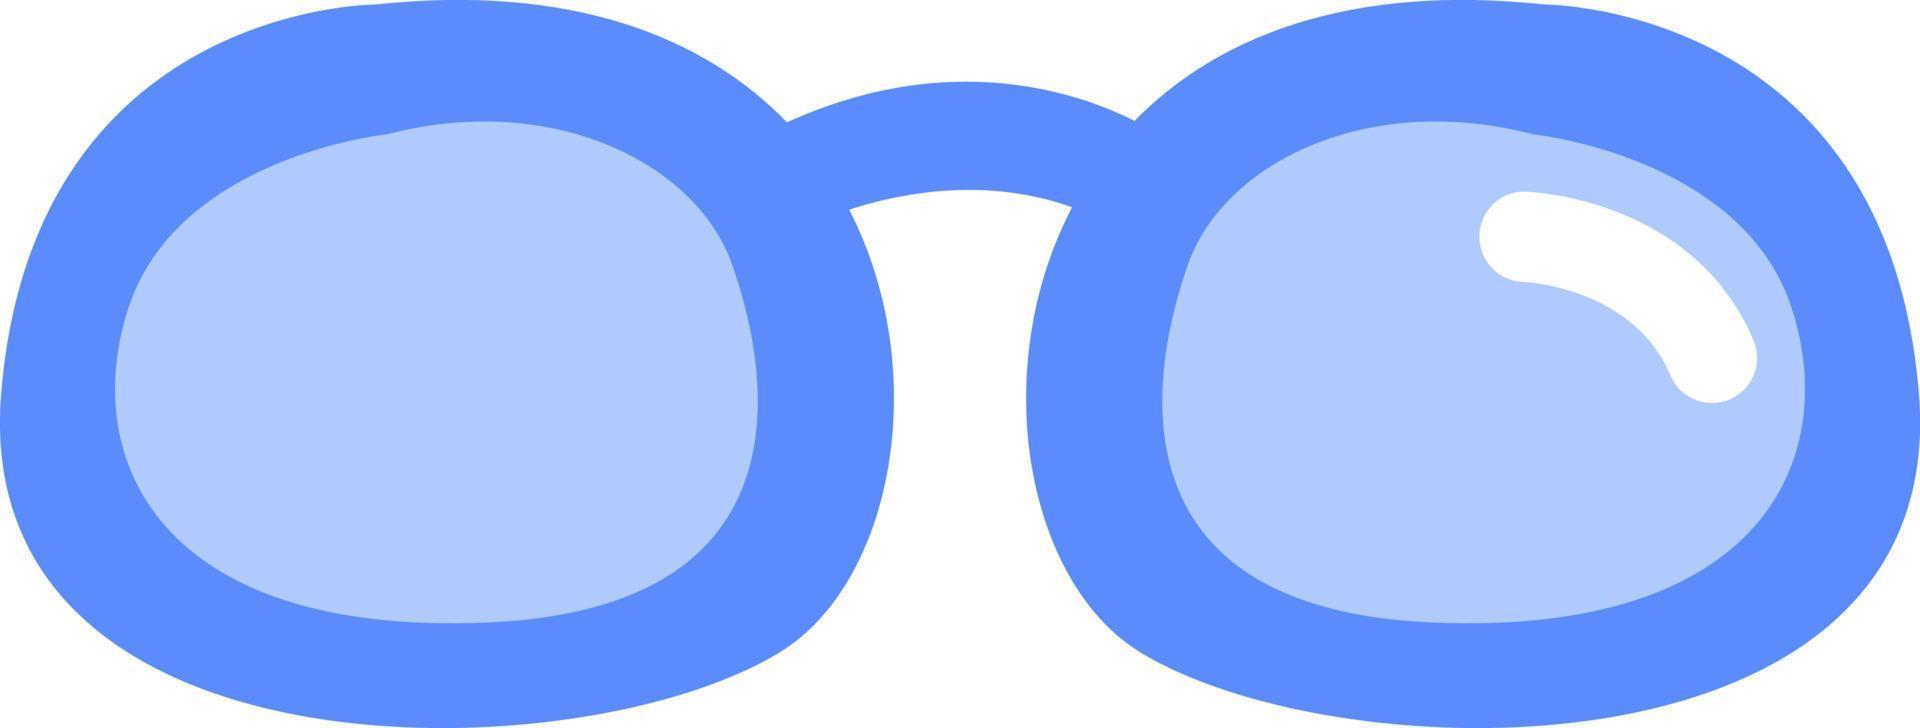 Blue office glasses, illustration, vector, on a white background. vector